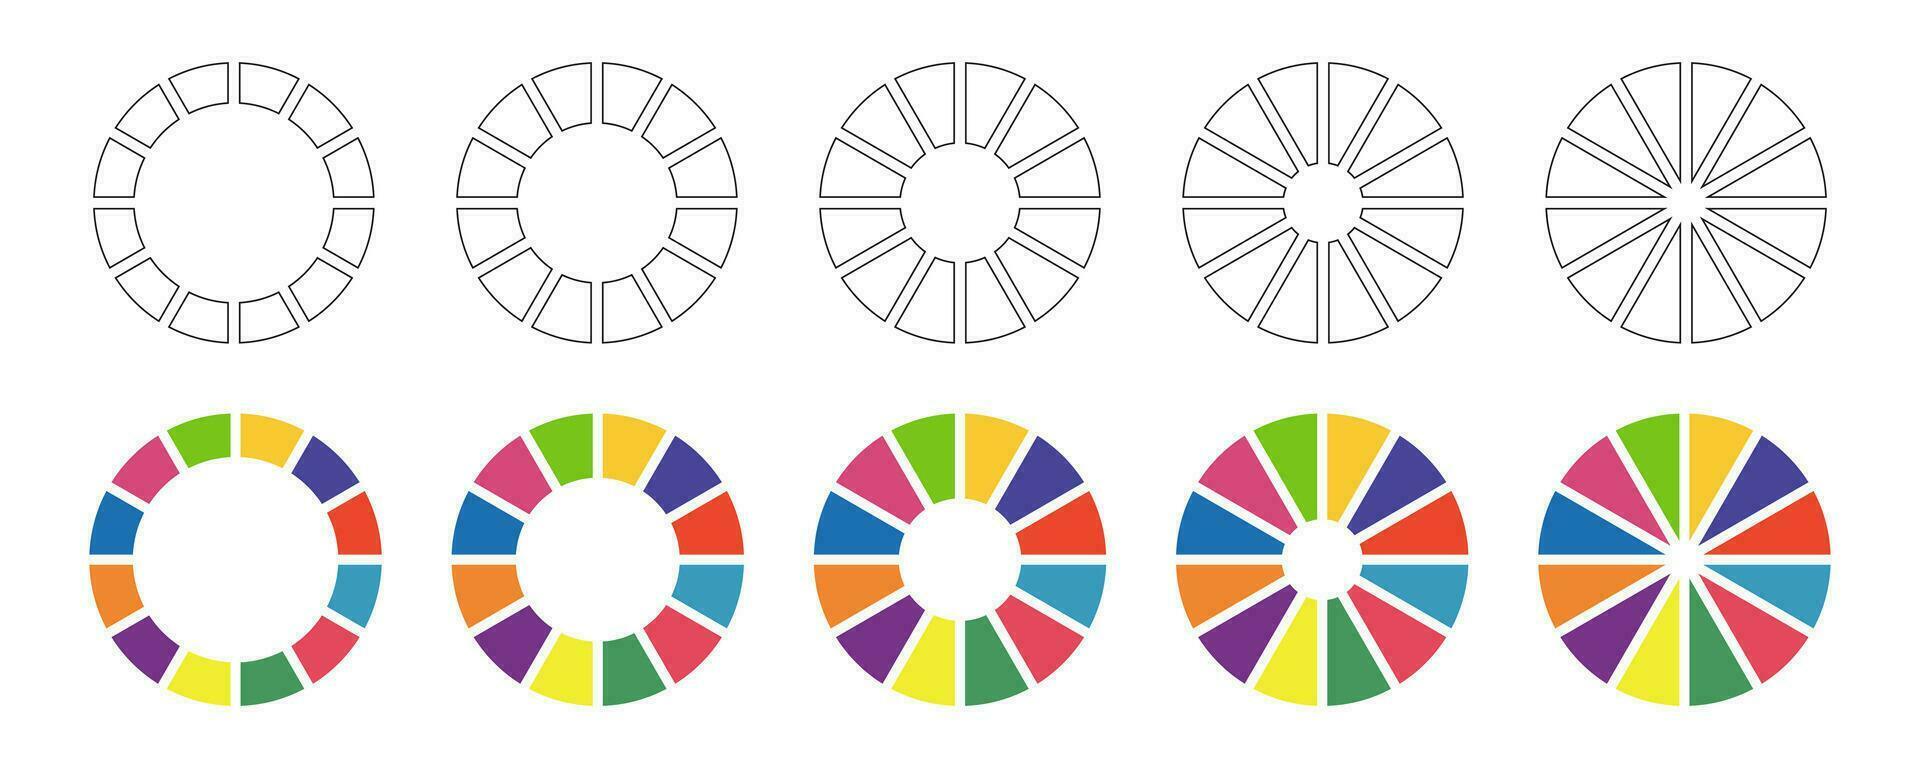 Donut charts, pies segmented on 12 equal parts. Diagrams infographic multicolored set. Wheels divided in twelve sections. Circle section graph. Pie chart round icons. Loading bars collection. Vector. vector